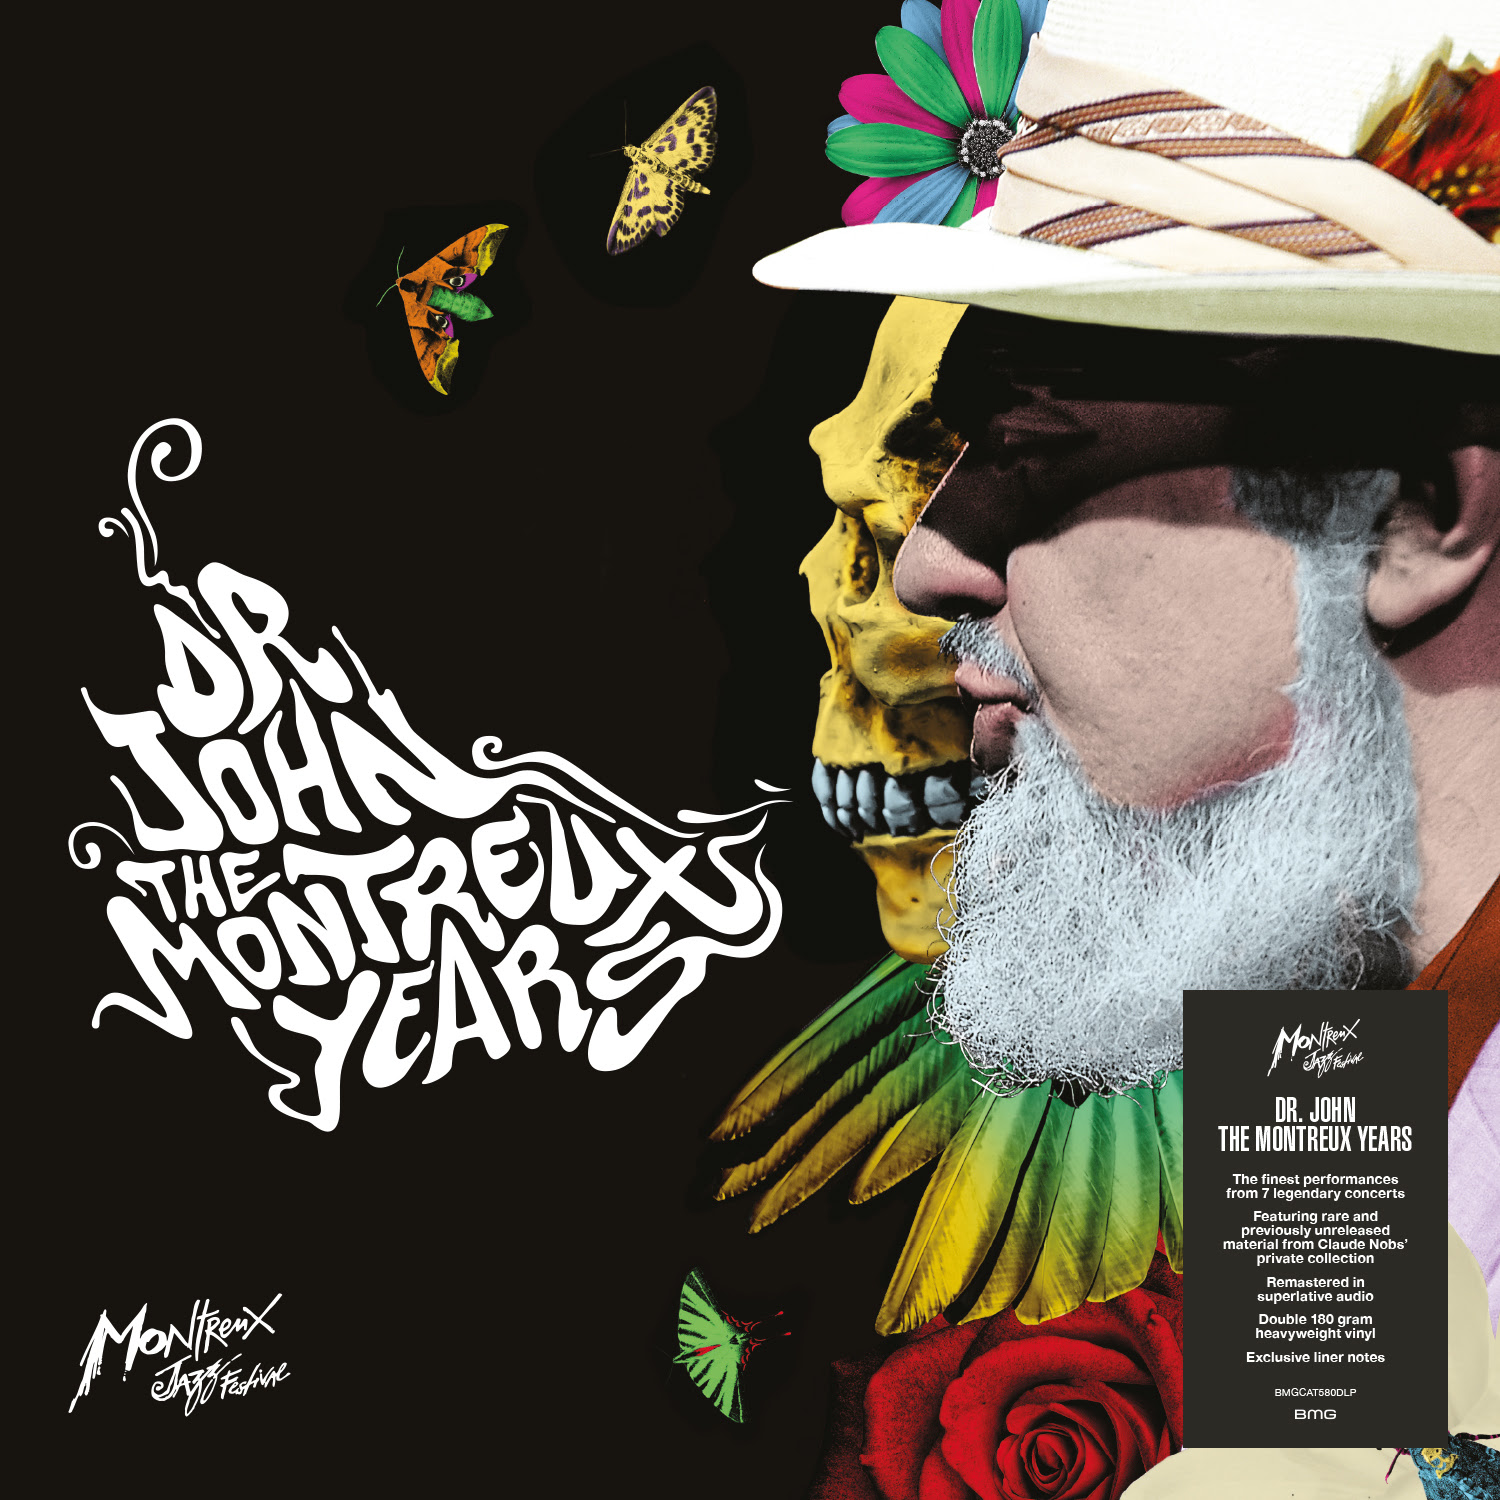 DR. JOHN: The Montreux Years out TODAY